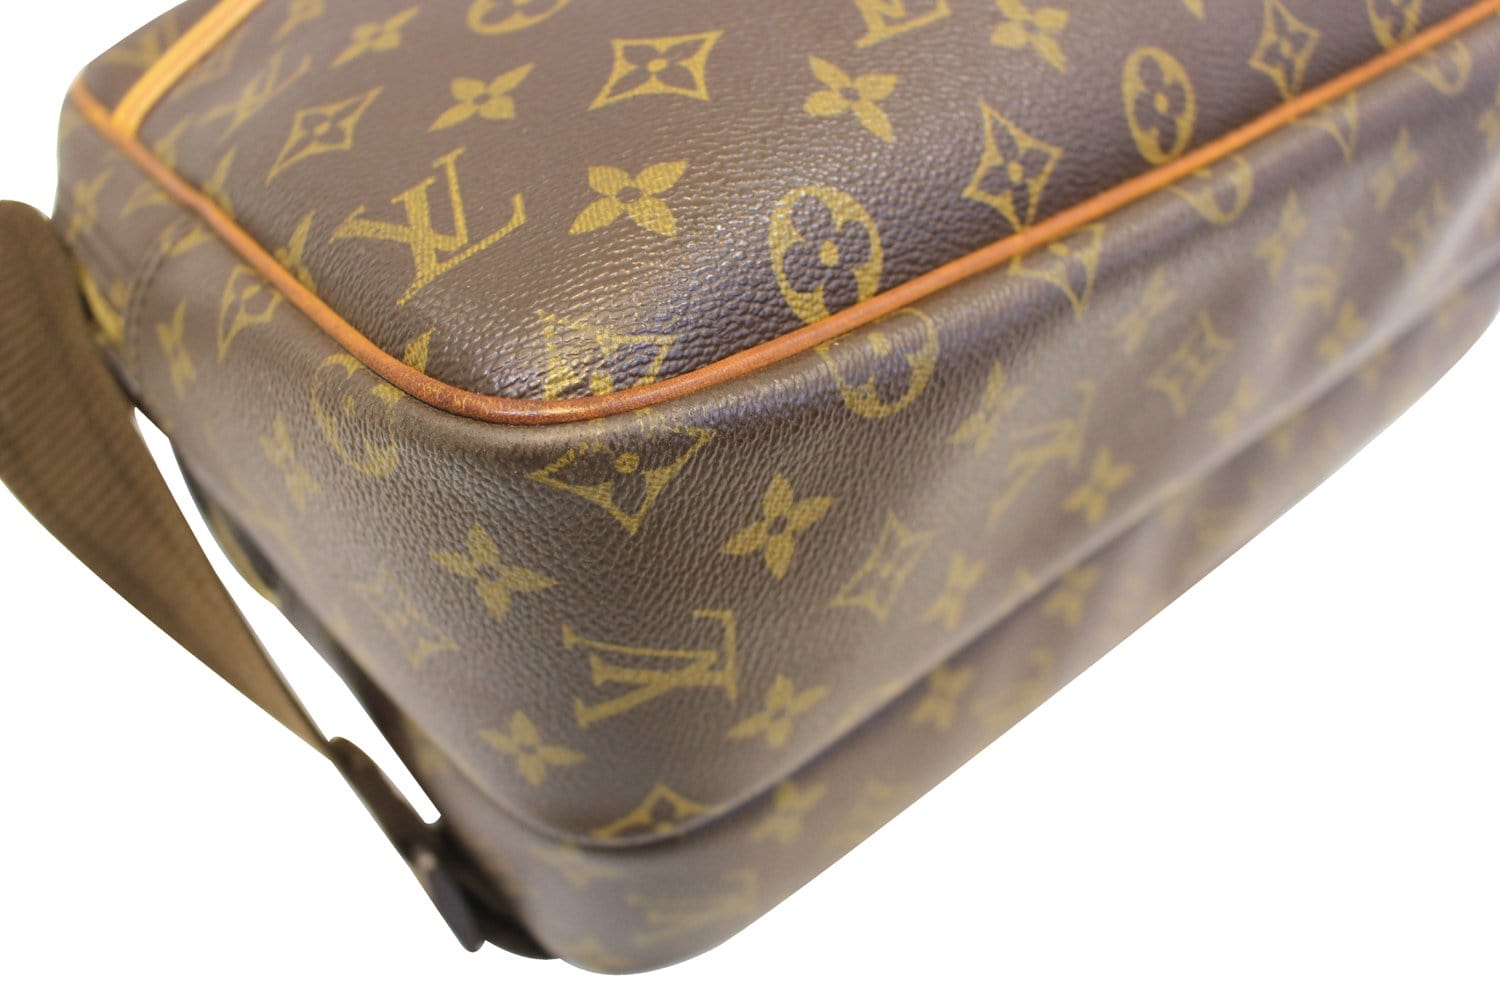 Sold at Auction: LOUIS VUITTON REPORTER GM